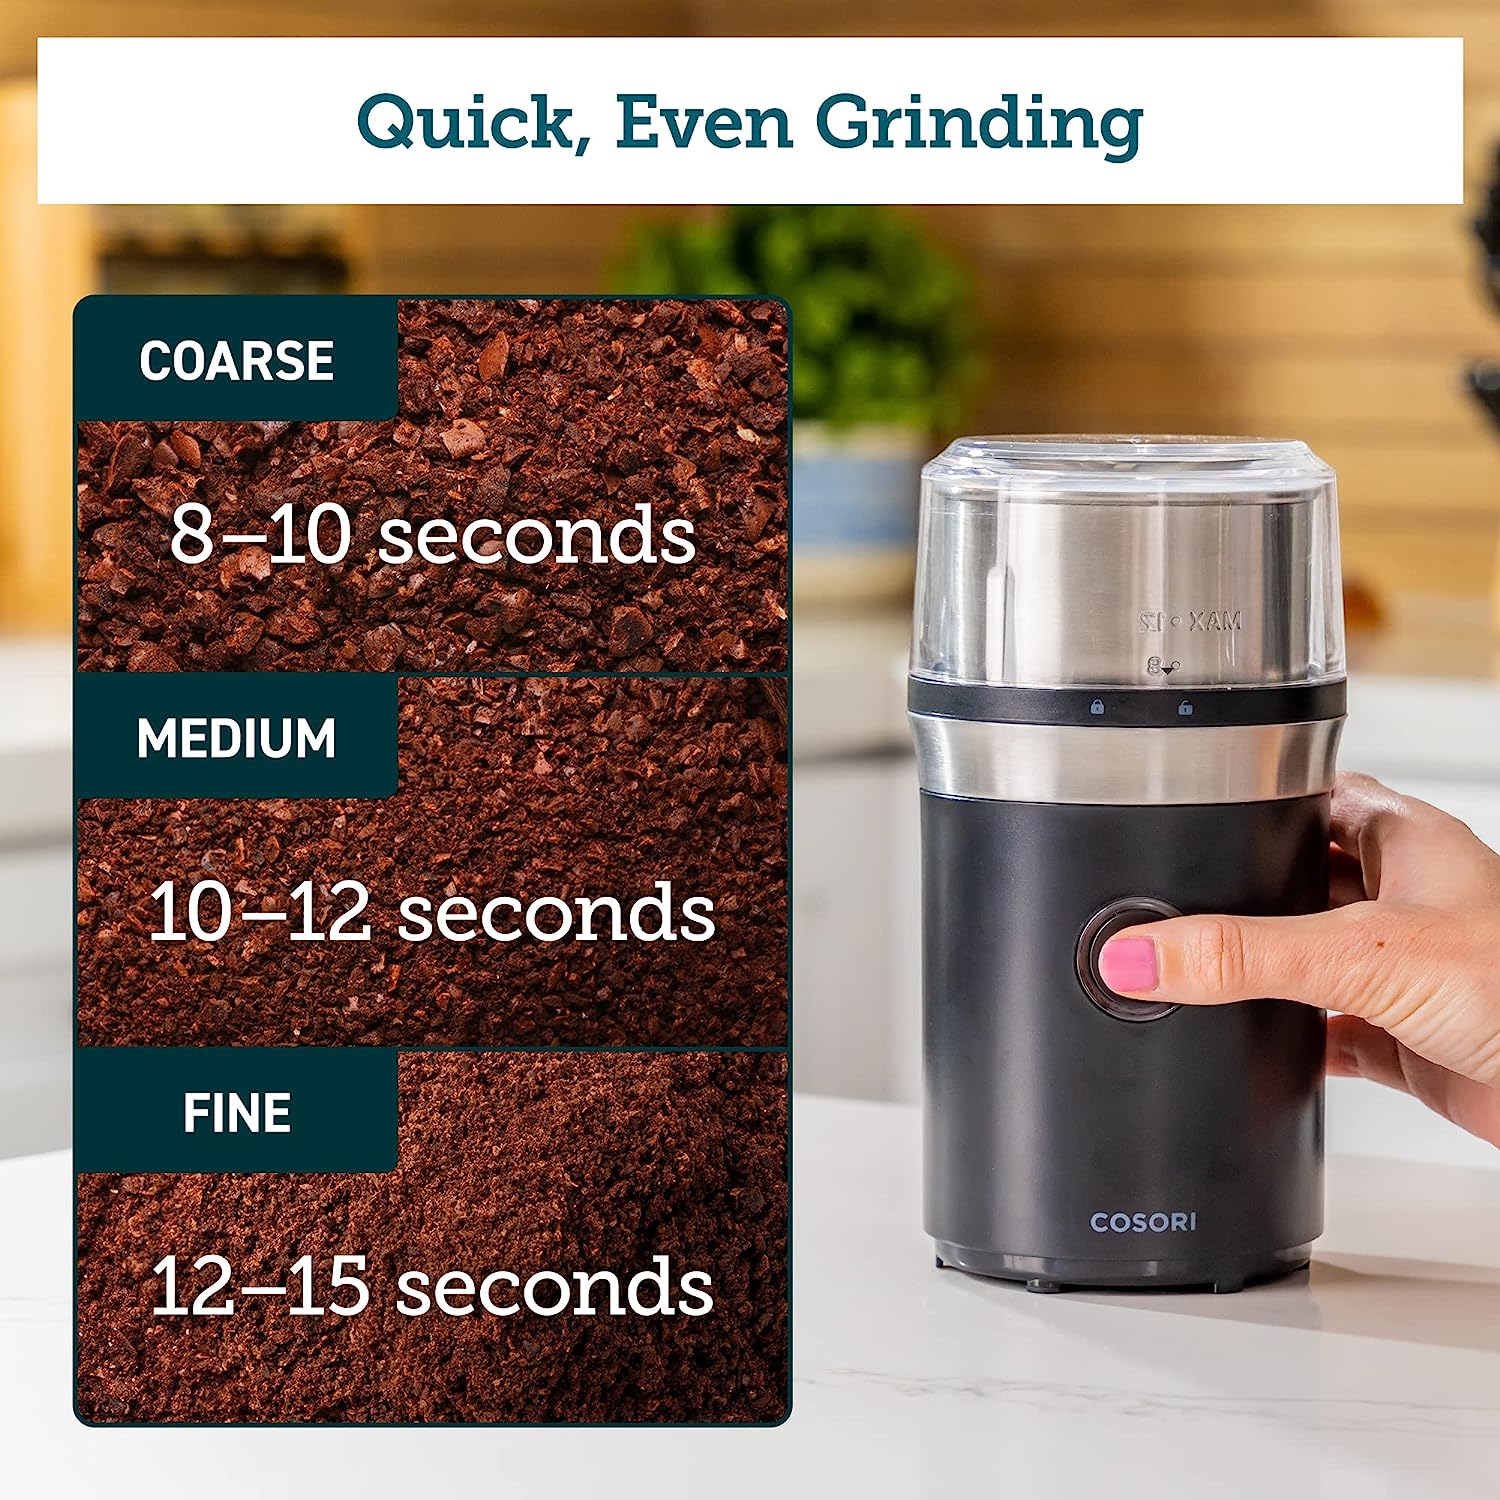 https://bigbigmart.com/wp-content/uploads/2023/10/COSORI-Electric-Coffee-Grinders-for-Spices-Seeds-Herbs-and-Coffee-Beans-Spice-Blender-and-Espresso-Grinder-Wet-and-Dry-Grinder-Included-2-Removable-Stainless-Steel-Bowls-Black3.jpg